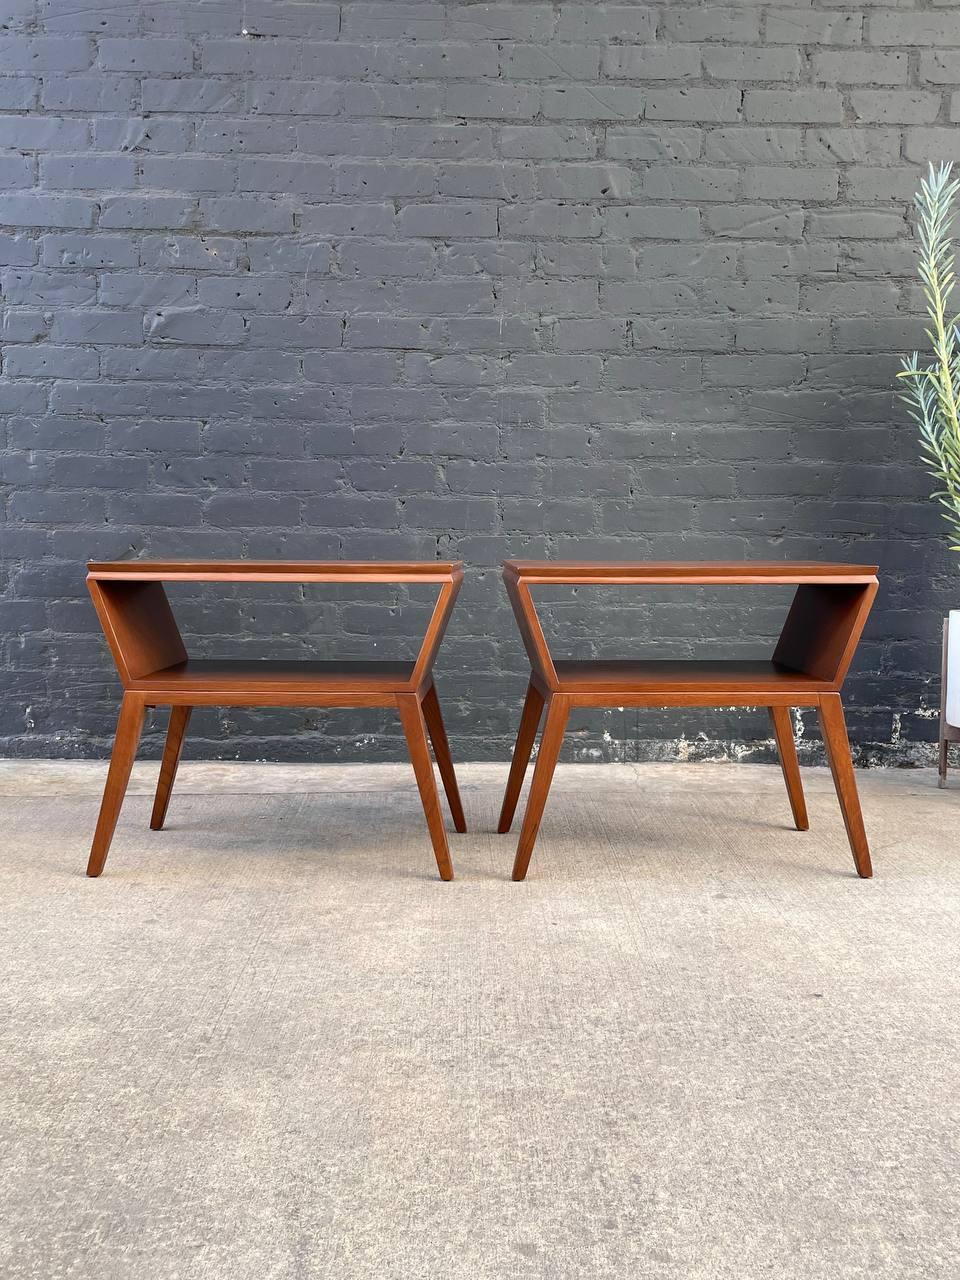 Walnut Newly Refinished - Pair of Mid-Century Modern Bookshelf Side Tables For Sale